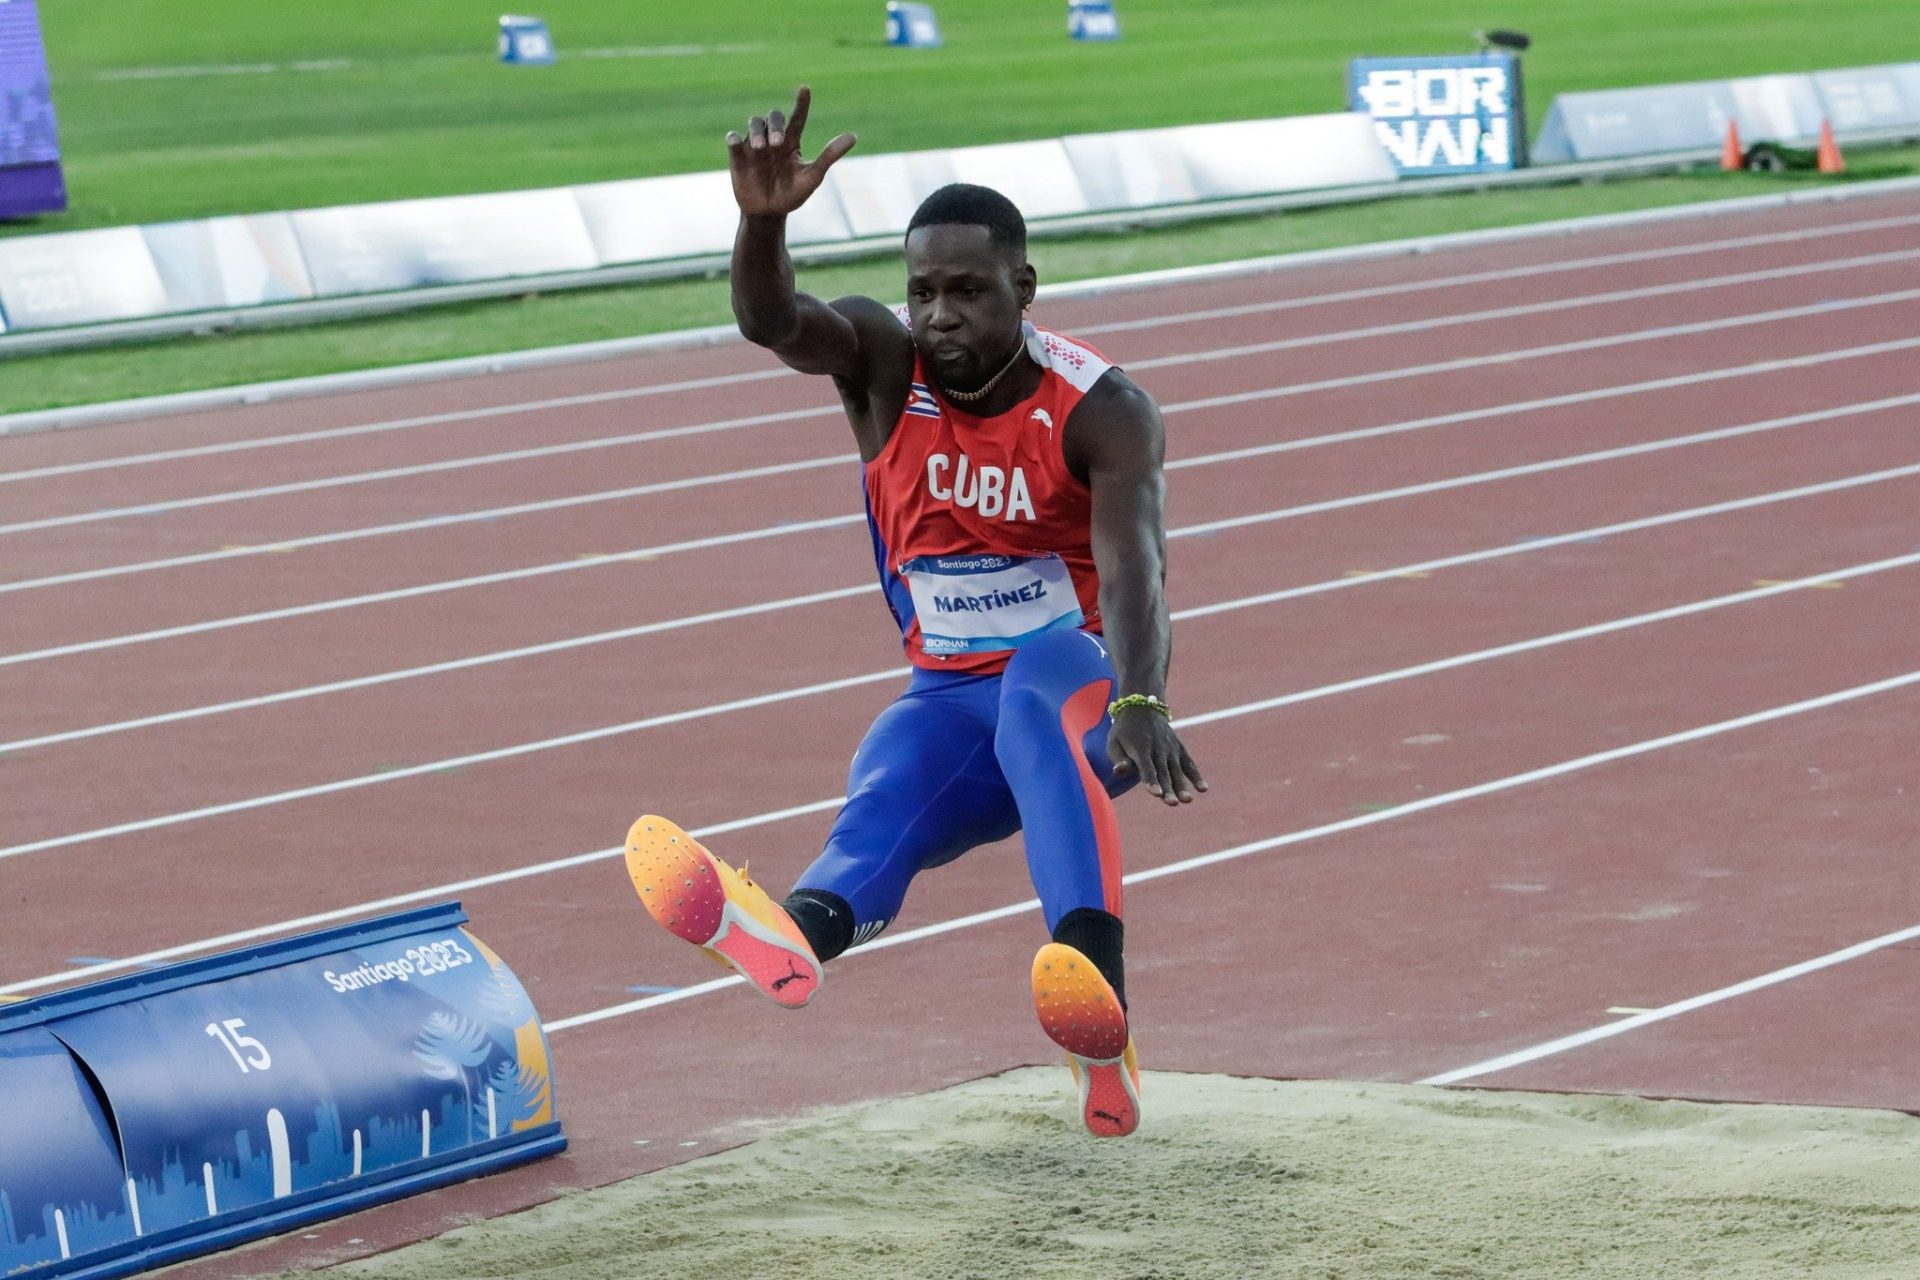 Lázaro Martínez only needed one valid jump to win the gold medal in triple jump at the Pan American Games in Santiago, Chile. Photo: Taken from JIT.